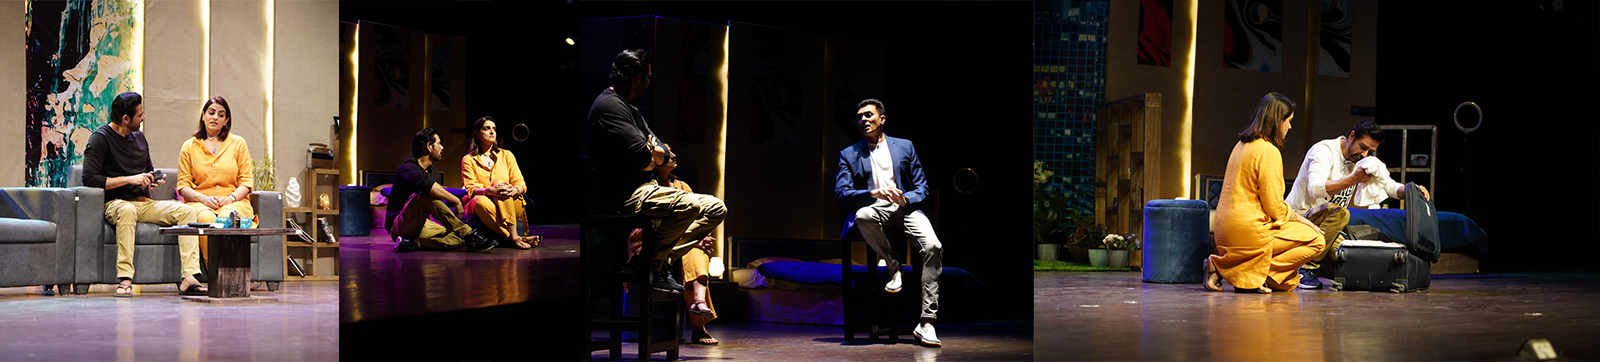 Comedy Play ‘My Wife’s 8th Vachan’ Brings Curtains Down on 3-Day Theatre Fest